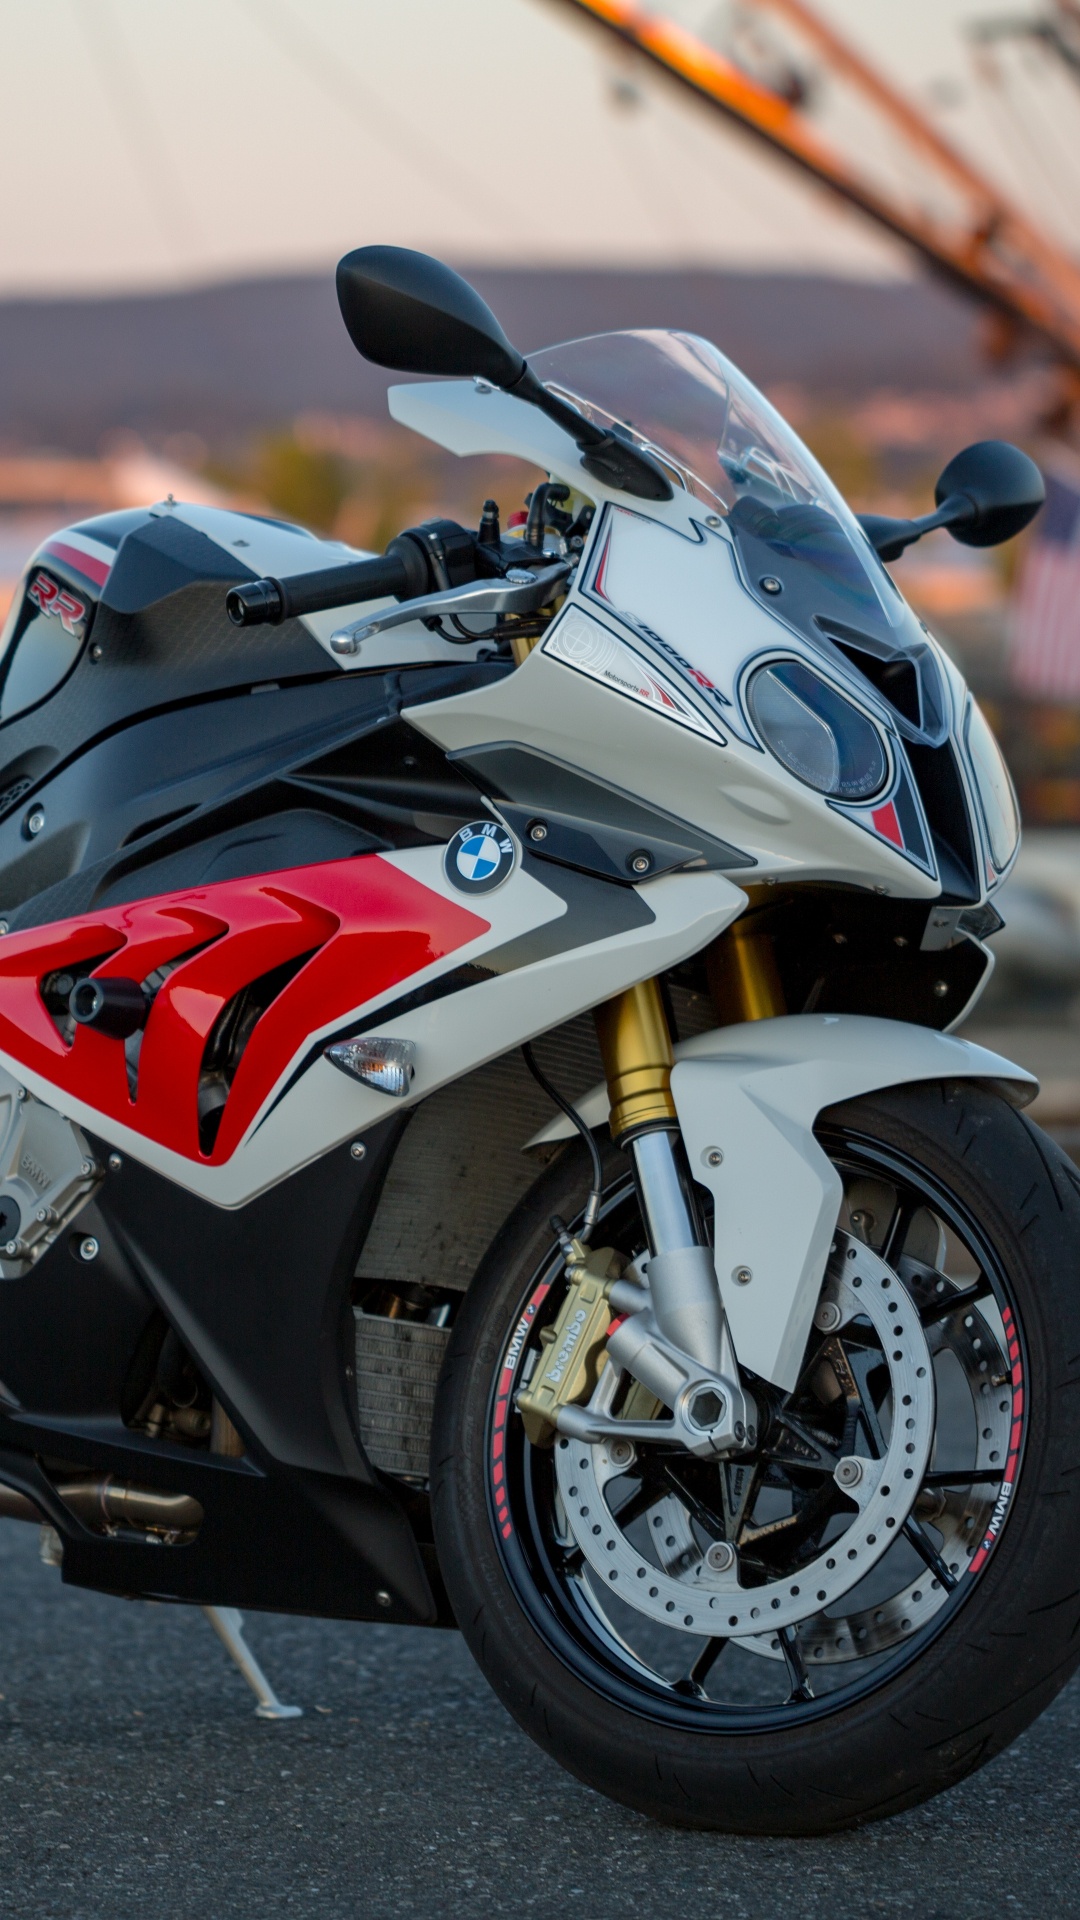 Red and Black Sports Bike on Road During Daytime. Wallpaper in 1080x1920 Resolution